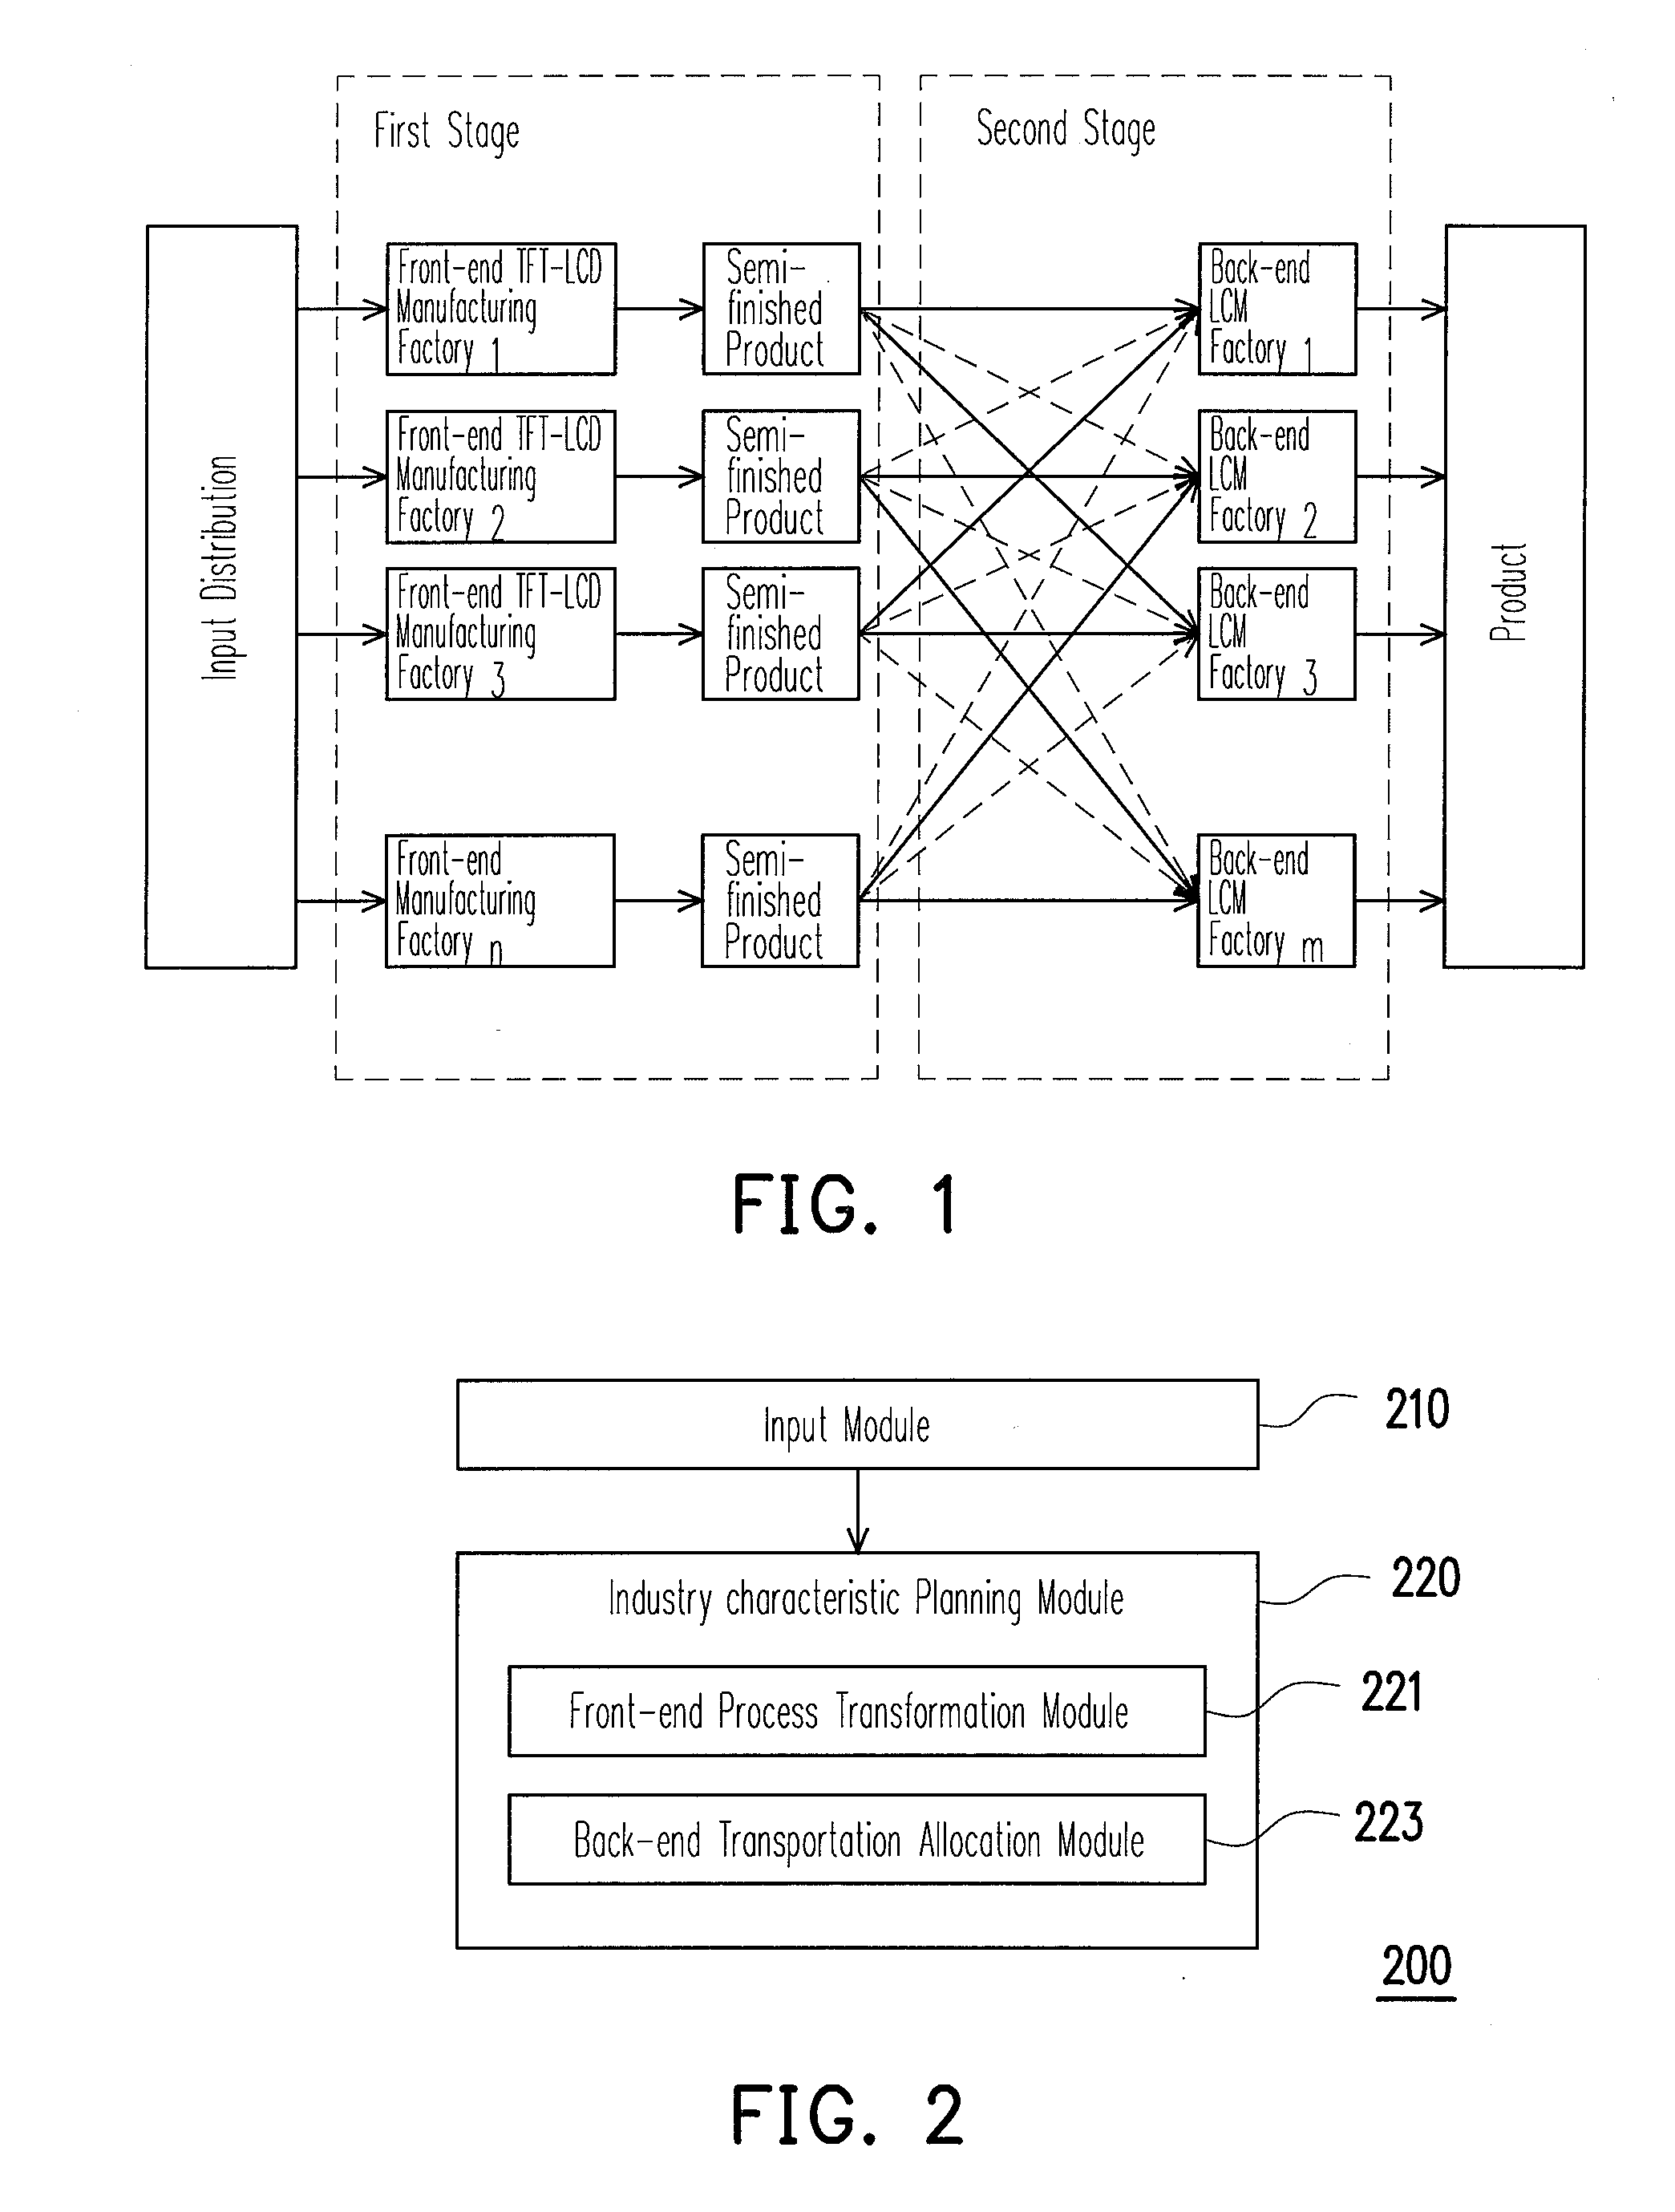 System and method for planning global logistics in tft-lcd manufacturing industry